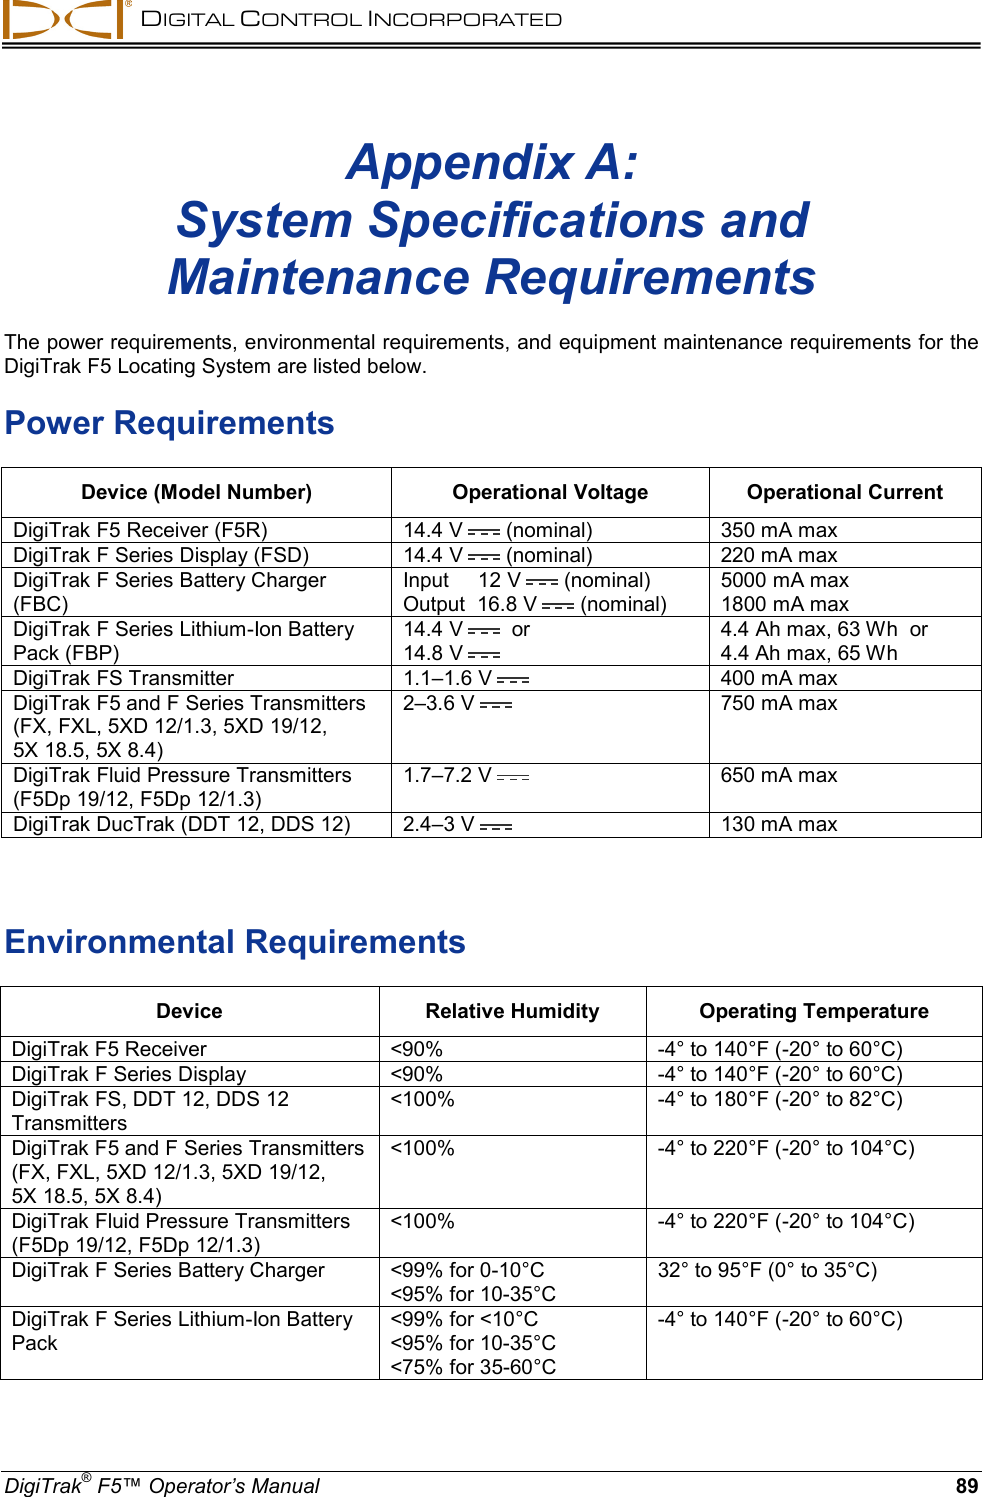  DIGITAL CONTROL INCORPORATED  DigiTrak® F5™ Operator’s Manual 89 Appendix A: System Specifications and Maintenance Requirements  The power requirements, environmental requirements, and equipment maintenance requirements for the DigiTrak F5 Locating System are listed below. Power Requirements Device (Model Number) Operational Voltage Operational Current DigiTrak F5 Receiver (F5R) 14.4 V  (nominal) 350 mA max DigiTrak F Series Display (FSD) 14.4 V  (nominal) 220 mA max DigiTrak F Series Battery Charger (FBC) Input     12 V  (nominal) Output  16.8 V  (nominal) 5000 mA max 1800 mA max  DigiTrak F Series Lithium-Ion Battery Pack (FBP) 14.4 V   or  14.8 V  4.4 Ah max, 63 Wh  or  4.4 Ah max, 65 Wh  DigiTrak FS Transmitter 1.1–1.6 V  400 mA max DigiTrak F5 and F Series Transmitters (FX, FXL, 5XD 12/1.3, 5XD 19/12, 5X 18.5, 5X 8.4)  2–3.6 V  750 mA max DigiTrak Fluid Pressure Transmitters (F5Dp 19/12, F5Dp 12/1.3) 1.7–7.2 V  650 mA max DigiTrak DucTrak (DDT 12, DDS 12) 2.4–3 V  130 mA max   Environmental Requirements Device Relative Humidity Operating Temperature DigiTrak F5 Receiver &lt;90% -4° to 140°F (-20° to 60°C) DigiTrak F Series Display &lt;90% -4° to 140°F (-20° to 60°C) DigiTrak FS, DDT 12, DDS 12 Transmitters &lt;100% -4° to 180°F (-20° to 82°C) DigiTrak F5 and F Series Transmitters (FX, FXL, 5XD 12/1.3, 5XD 19/12, 5X 18.5, 5X 8.4) &lt;100% -4° to 220°F (-20° to 104°C) DigiTrak Fluid Pressure Transmitters (F5Dp 19/12, F5Dp 12/1.3) &lt;100% -4° to 220°F (-20° to 104°C) DigiTrak F Series Battery Charger &lt;99% for 0-10°C &lt;95% for 10-35°C 32° to 95°F (0° to 35°C) DigiTrak F Series Lithium-Ion Battery Pack &lt;99% for &lt;10°C &lt;95% for 10-35°C &lt;75% for 35-60°C -4° to 140°F (-20° to 60°C)  